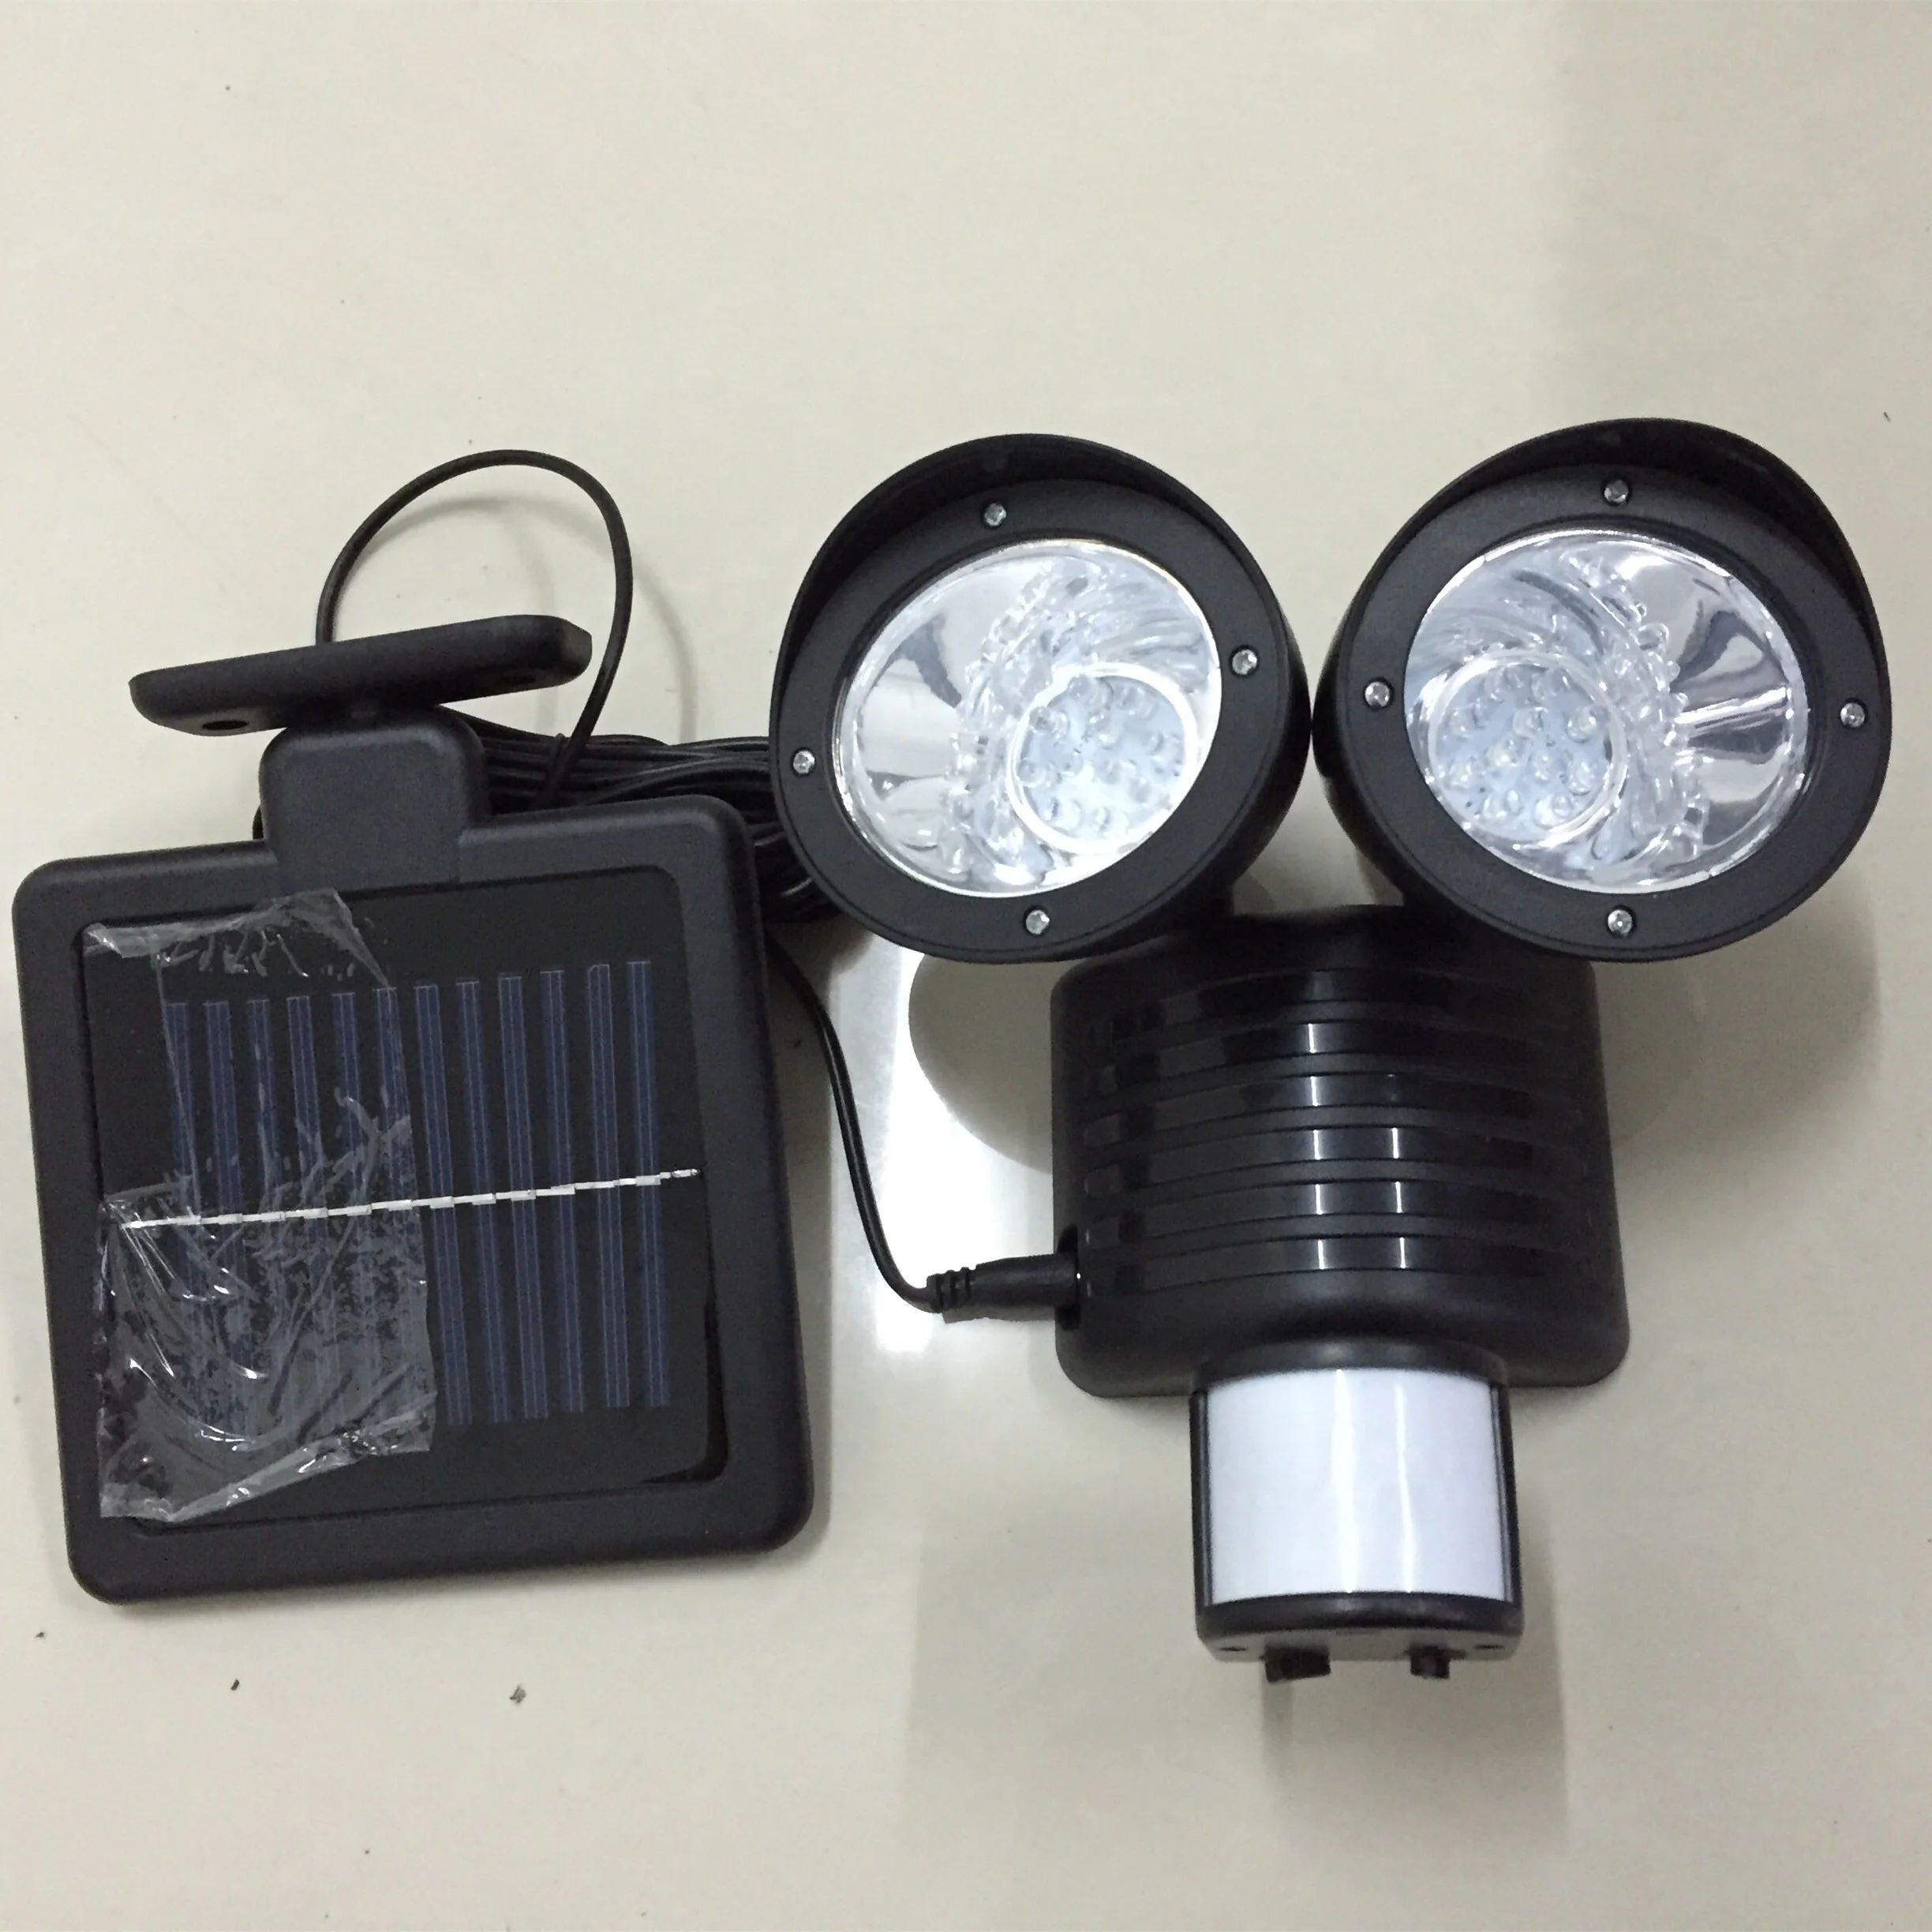 Innovations Motion-Activated Dual Head Solar LED Security Spot light Twins Head 22 Bright SMD led Motion Sensor Security Light